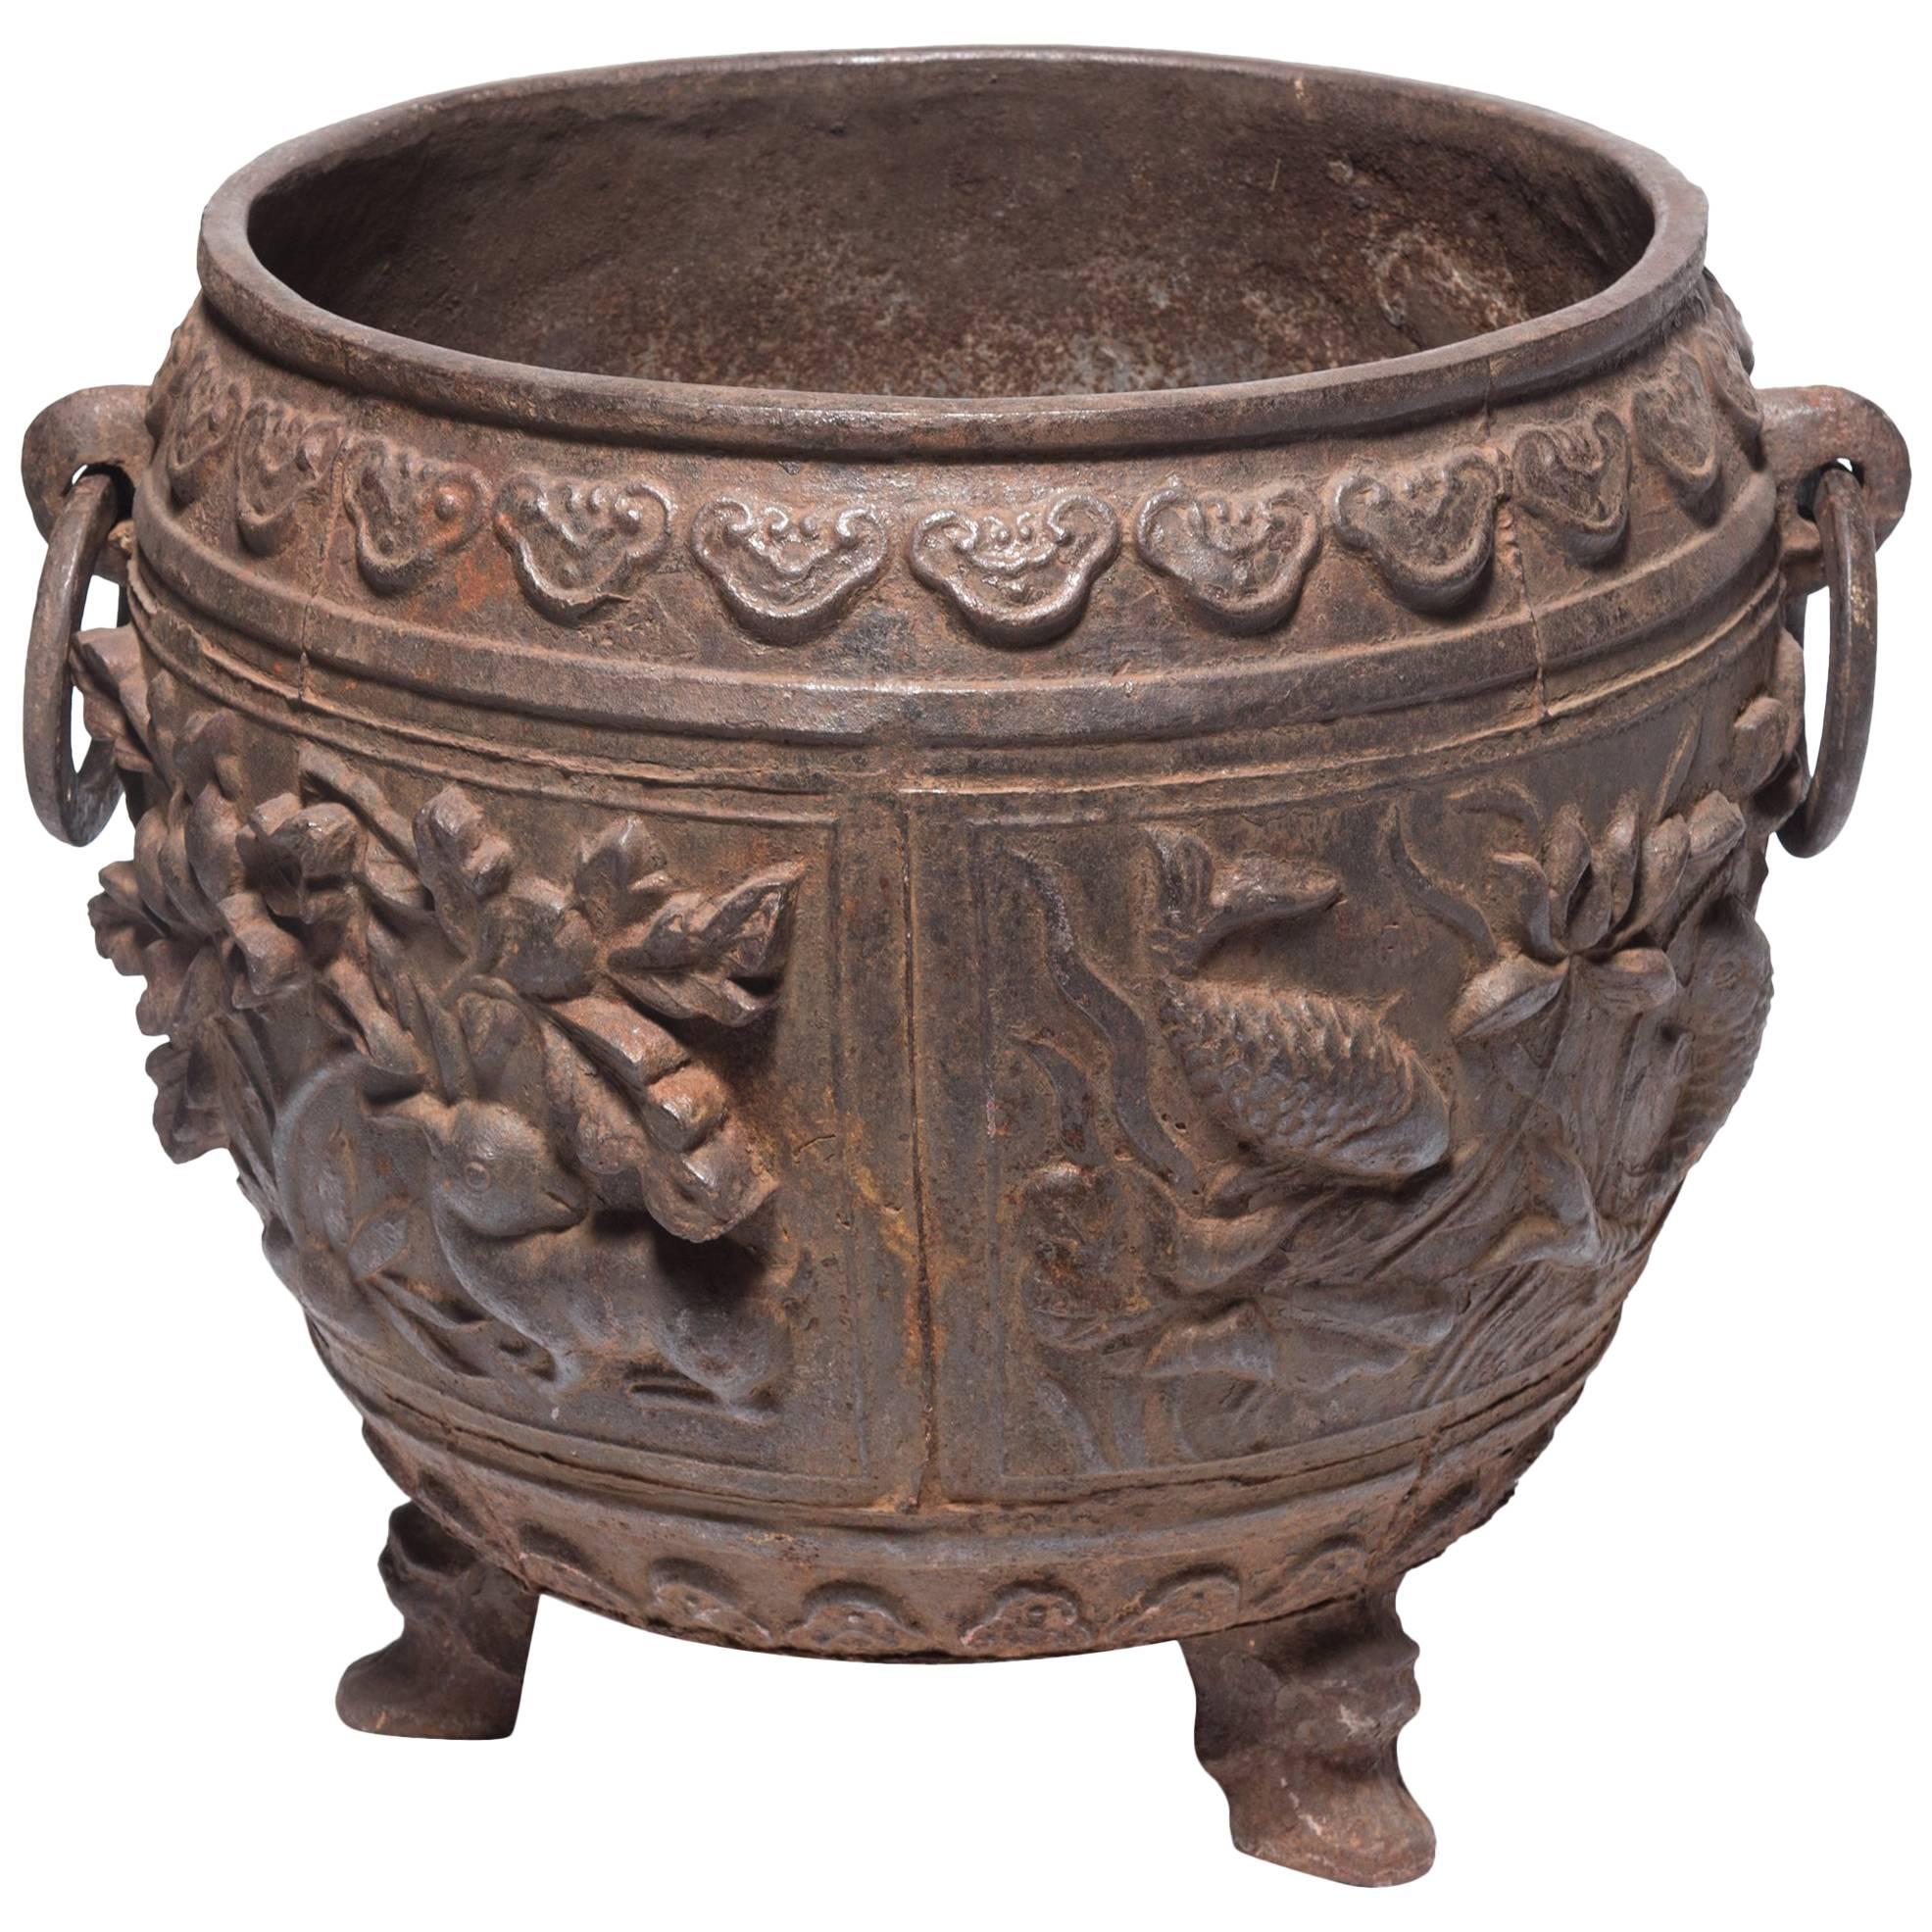 Large Chinese Cast Iron Urn with Heavy Relief